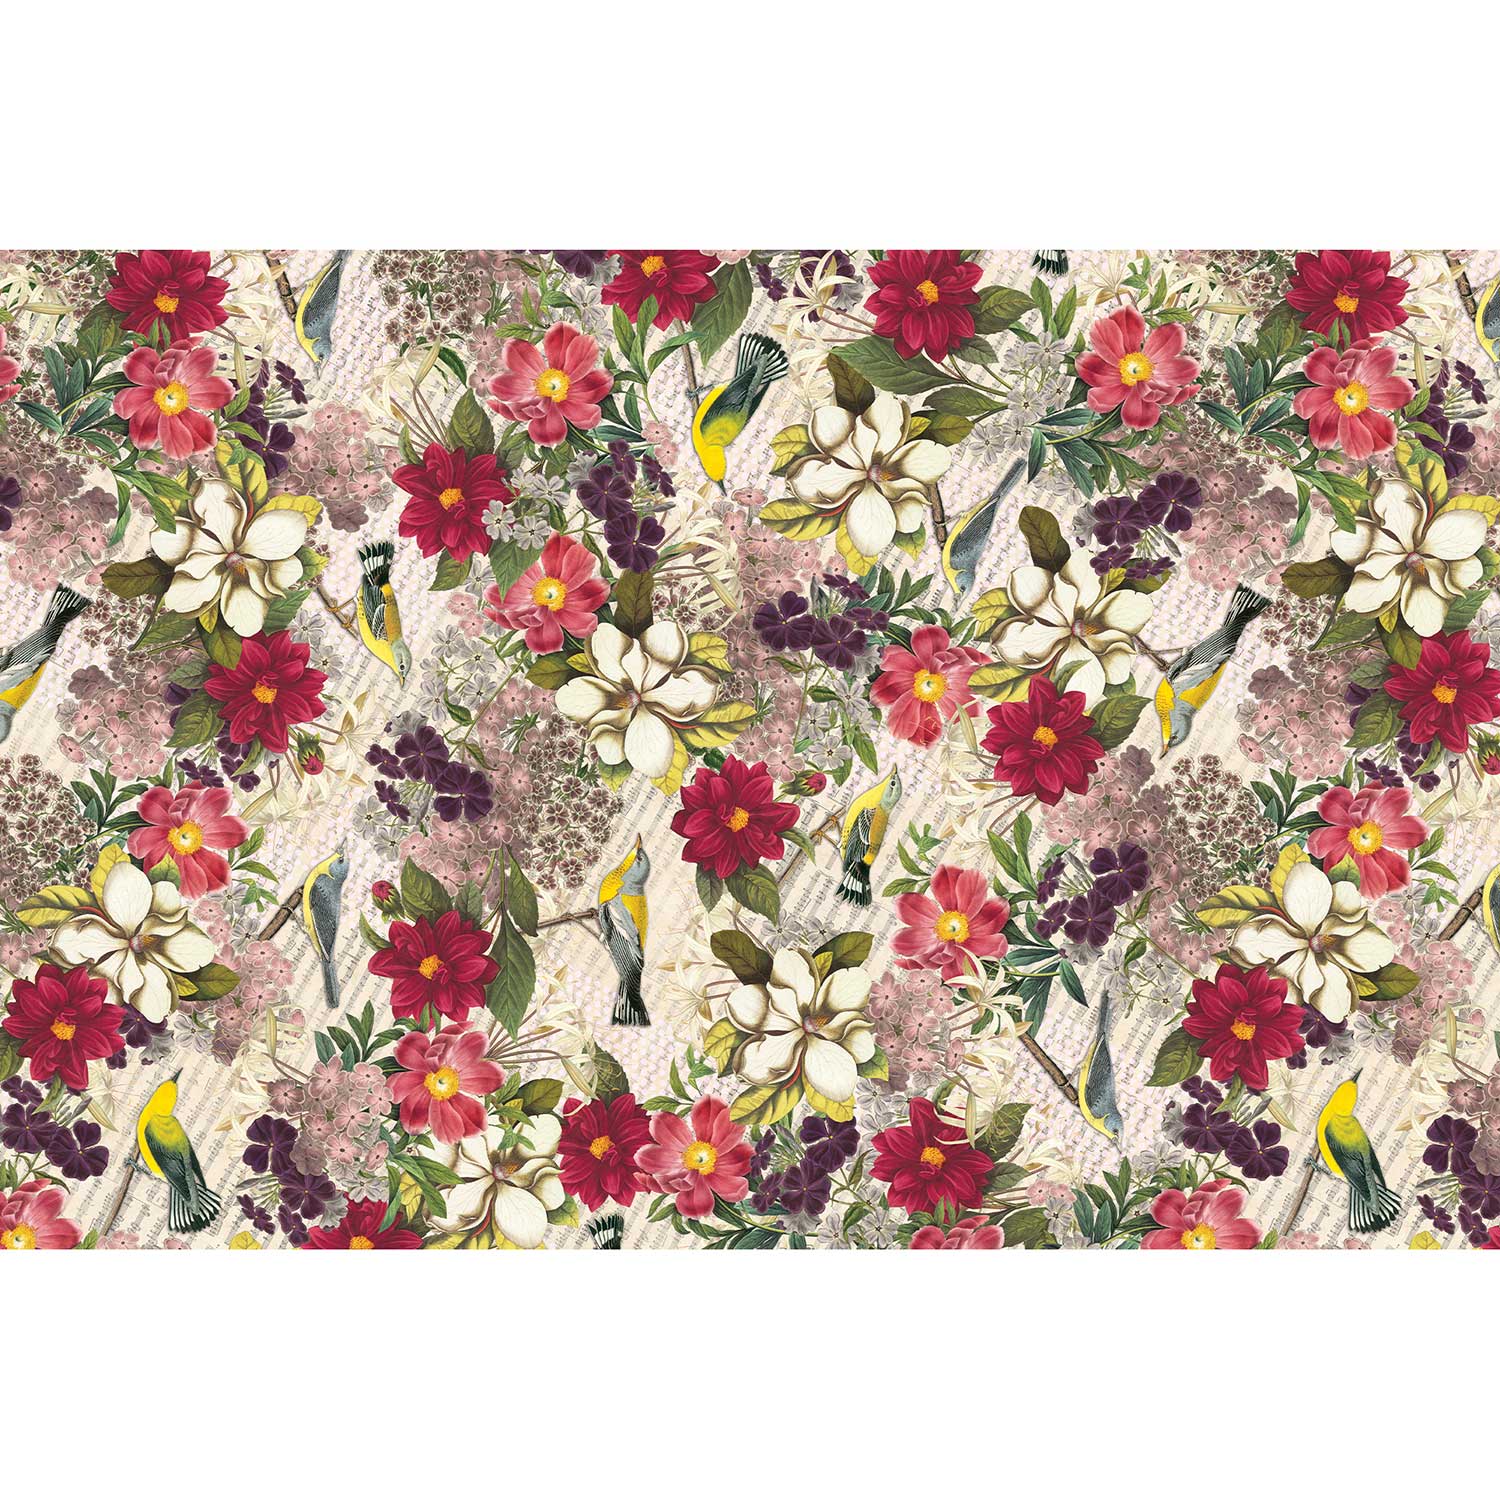 Magnolia 20 x 30 Floral Gift Tissue Paper, 48 Folded Sheets